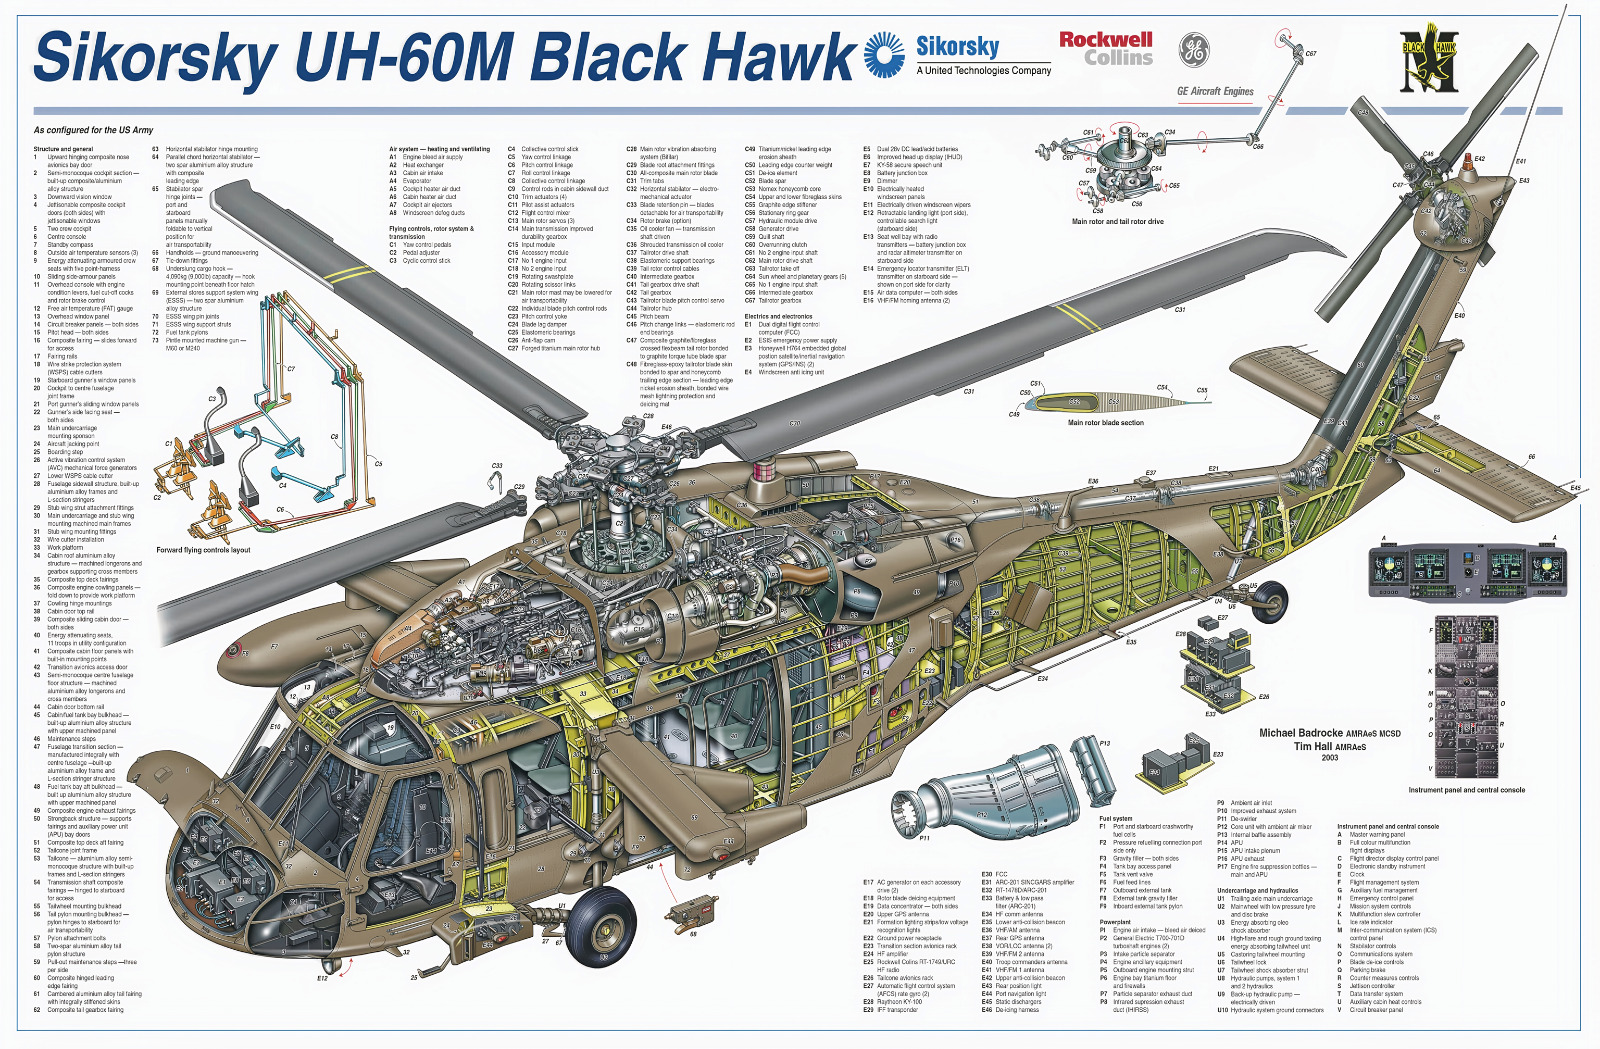 Sikorsky UH-60M Black Hawk Military Helicopter Cutaway Poster 24in x 36in